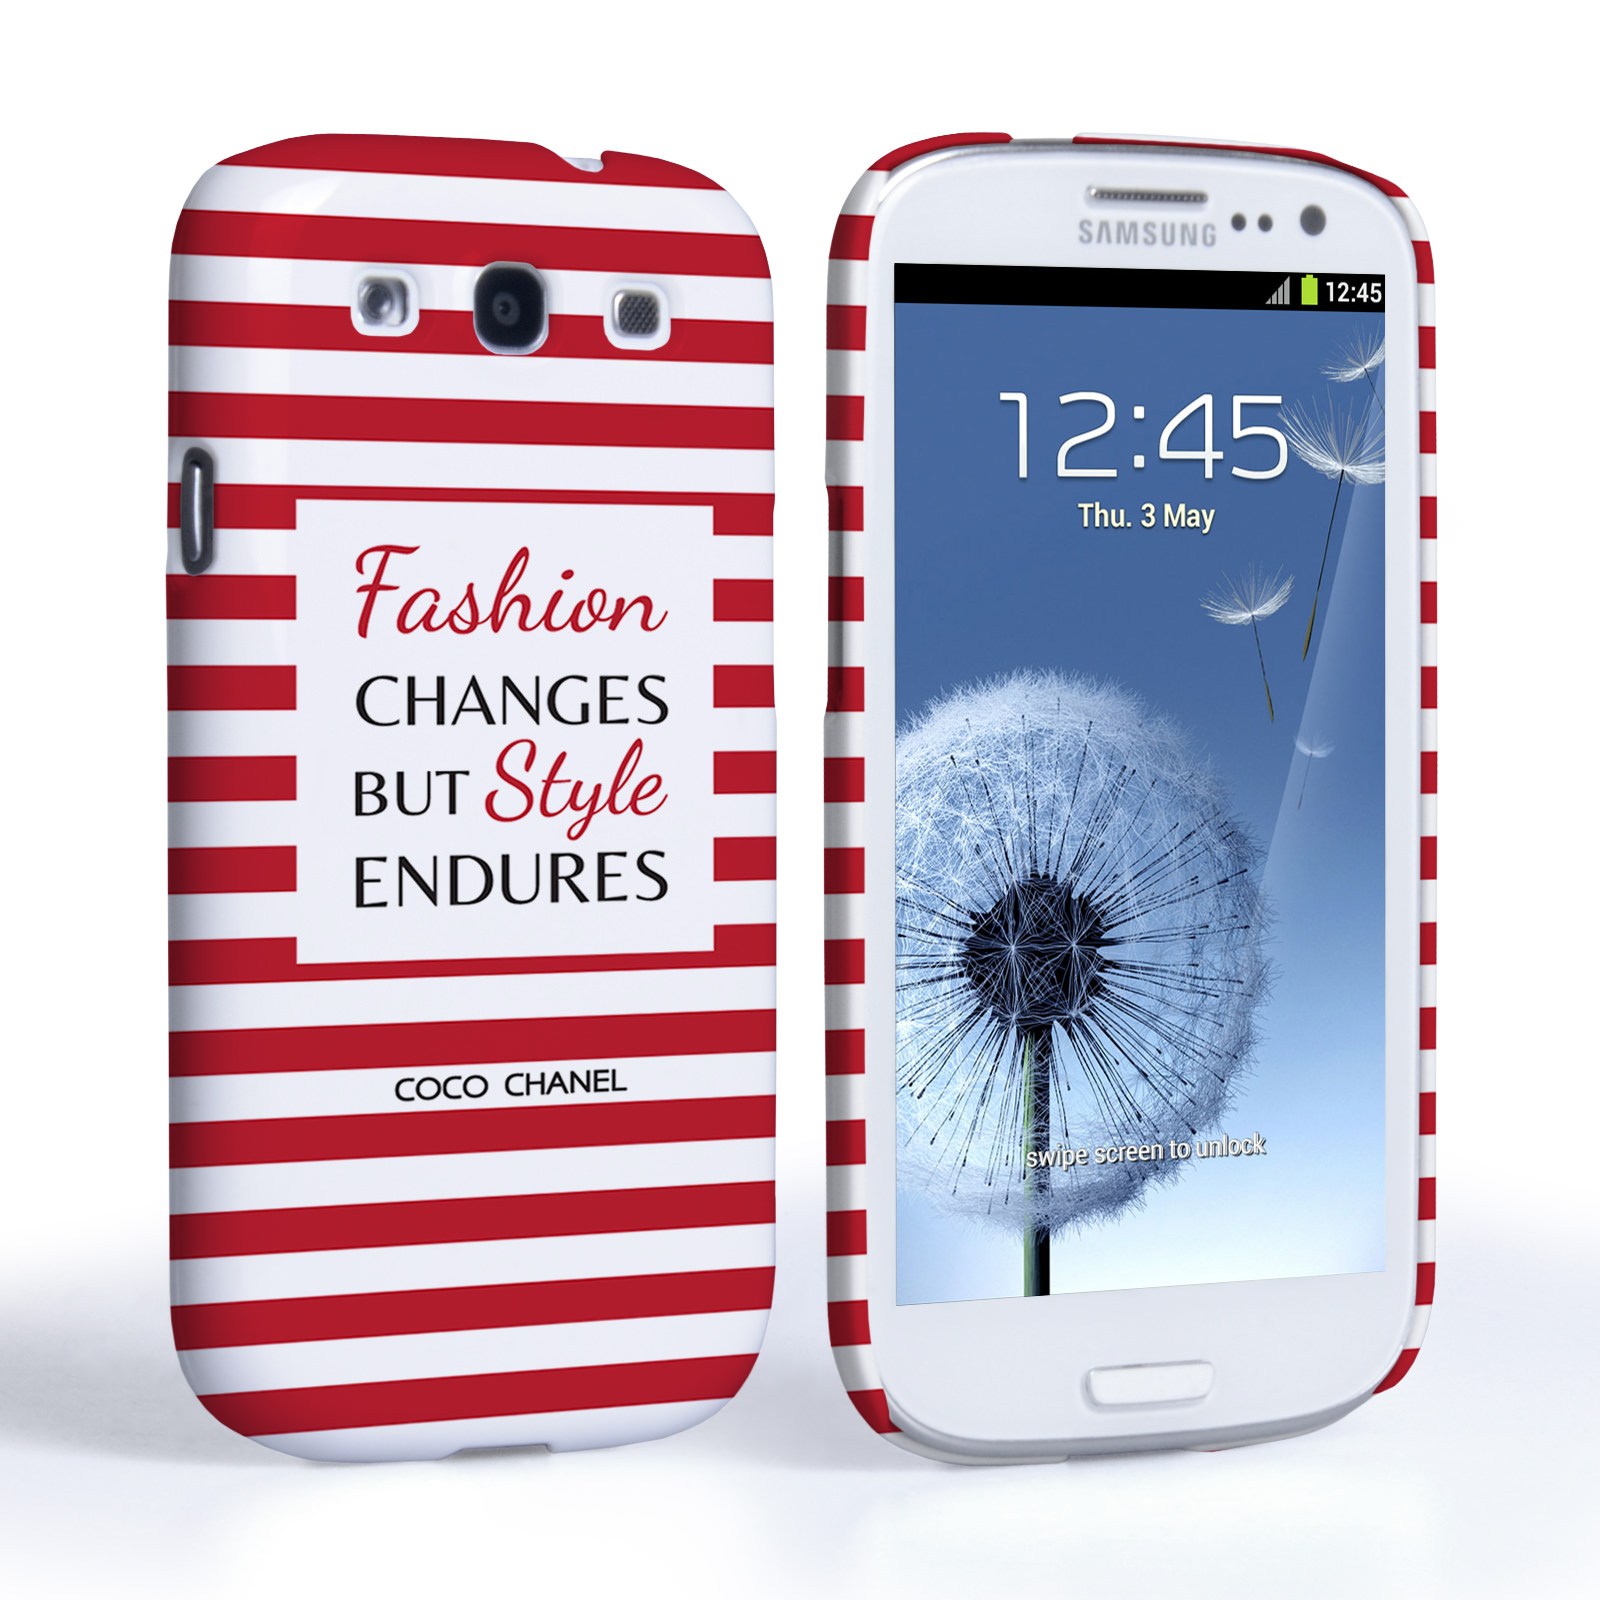 Caseflex Samsung Galaxy S3 Chanel ‘Fashion Changes’ Quote Case – Red and White